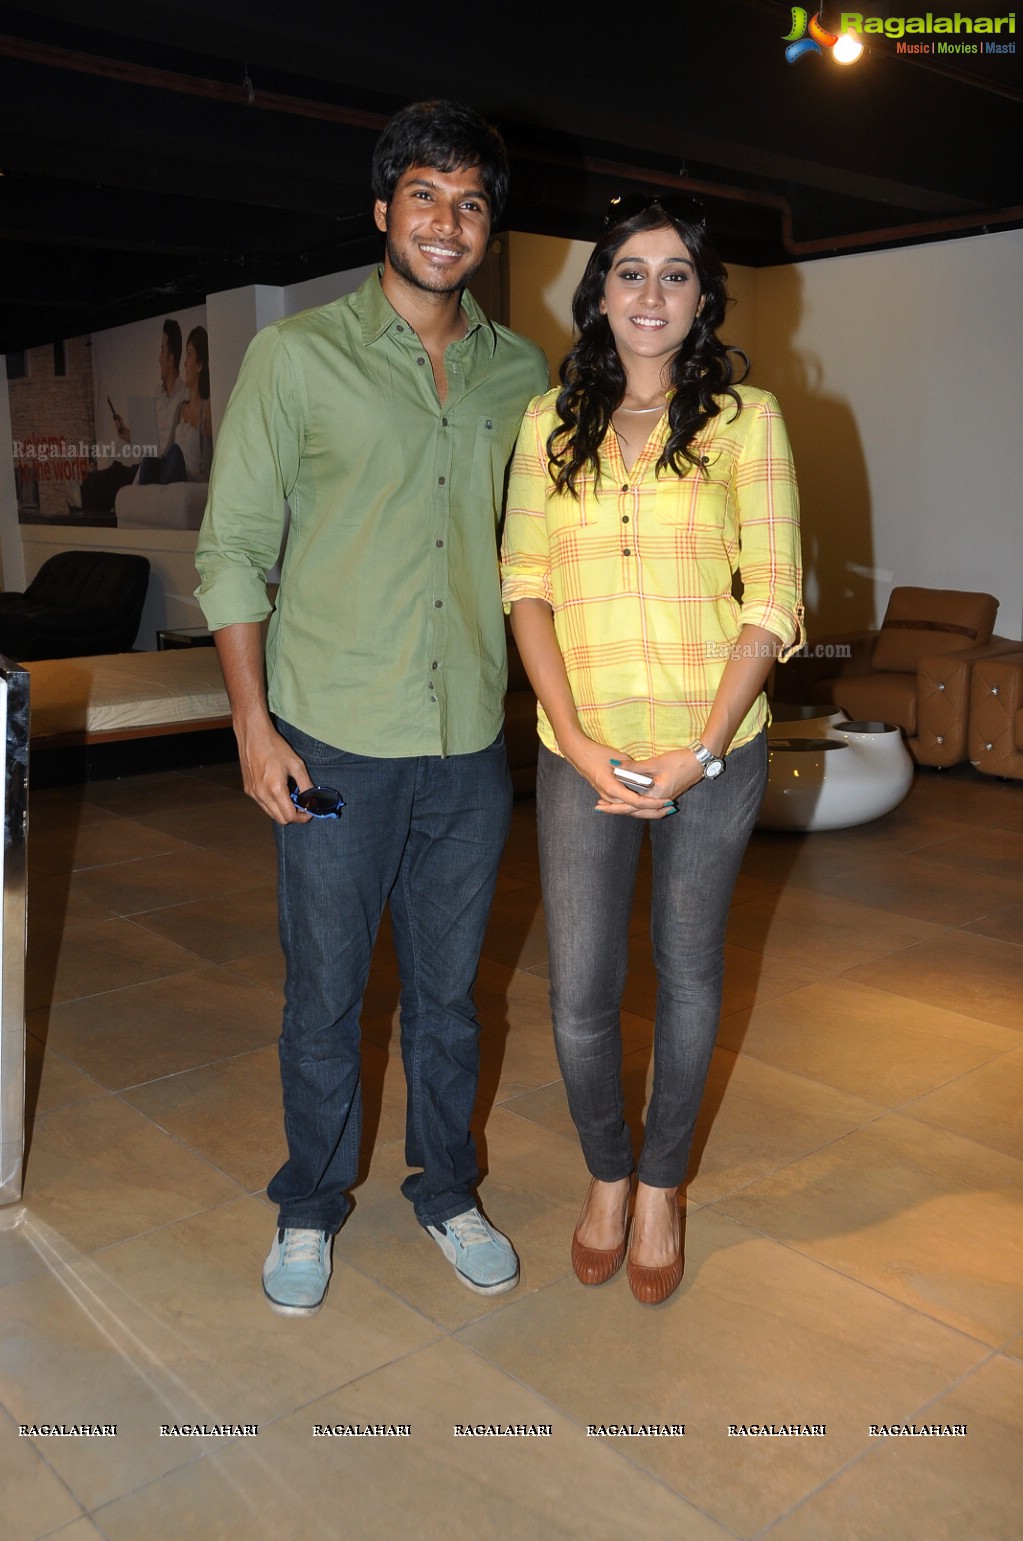 Routine Love Story Promotions at Furniture World, Hyderabad